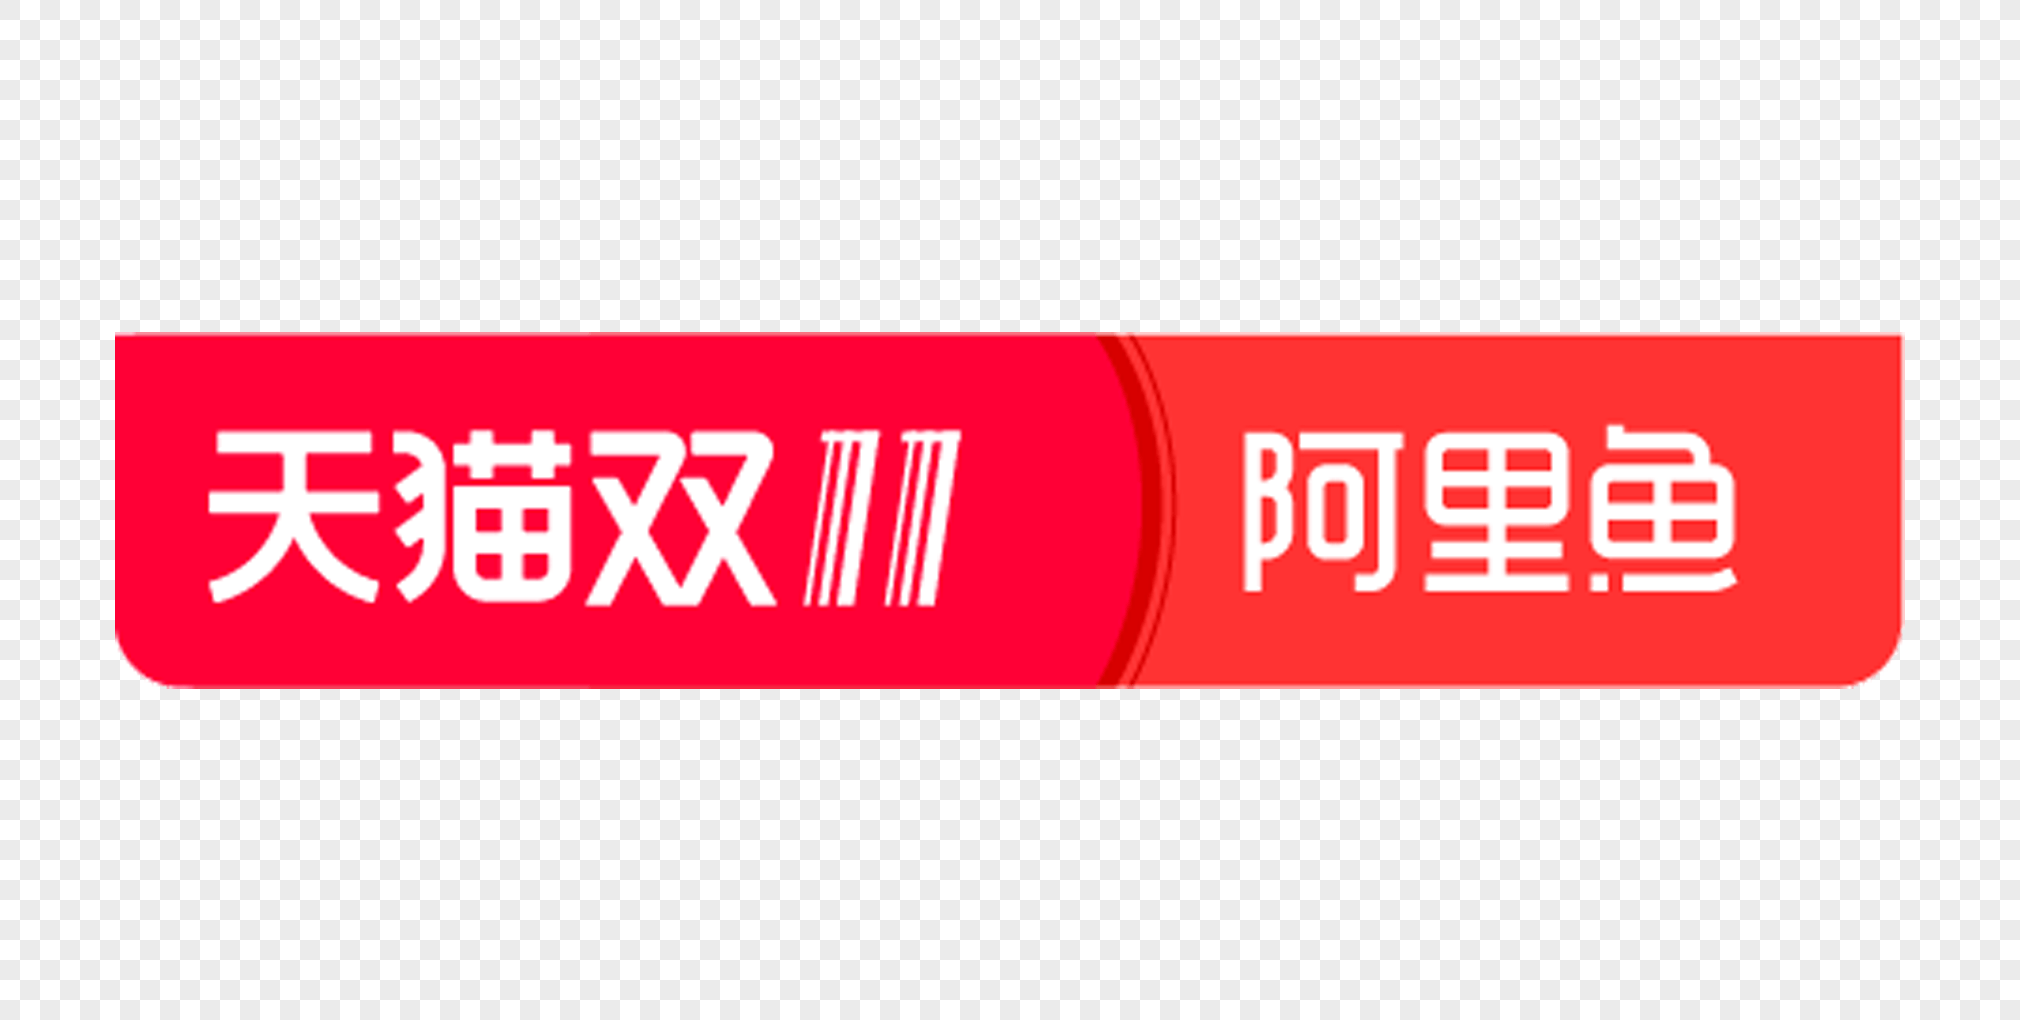 Tmall Logo - 2018 double 11 tmall logo png image_picture free download ...